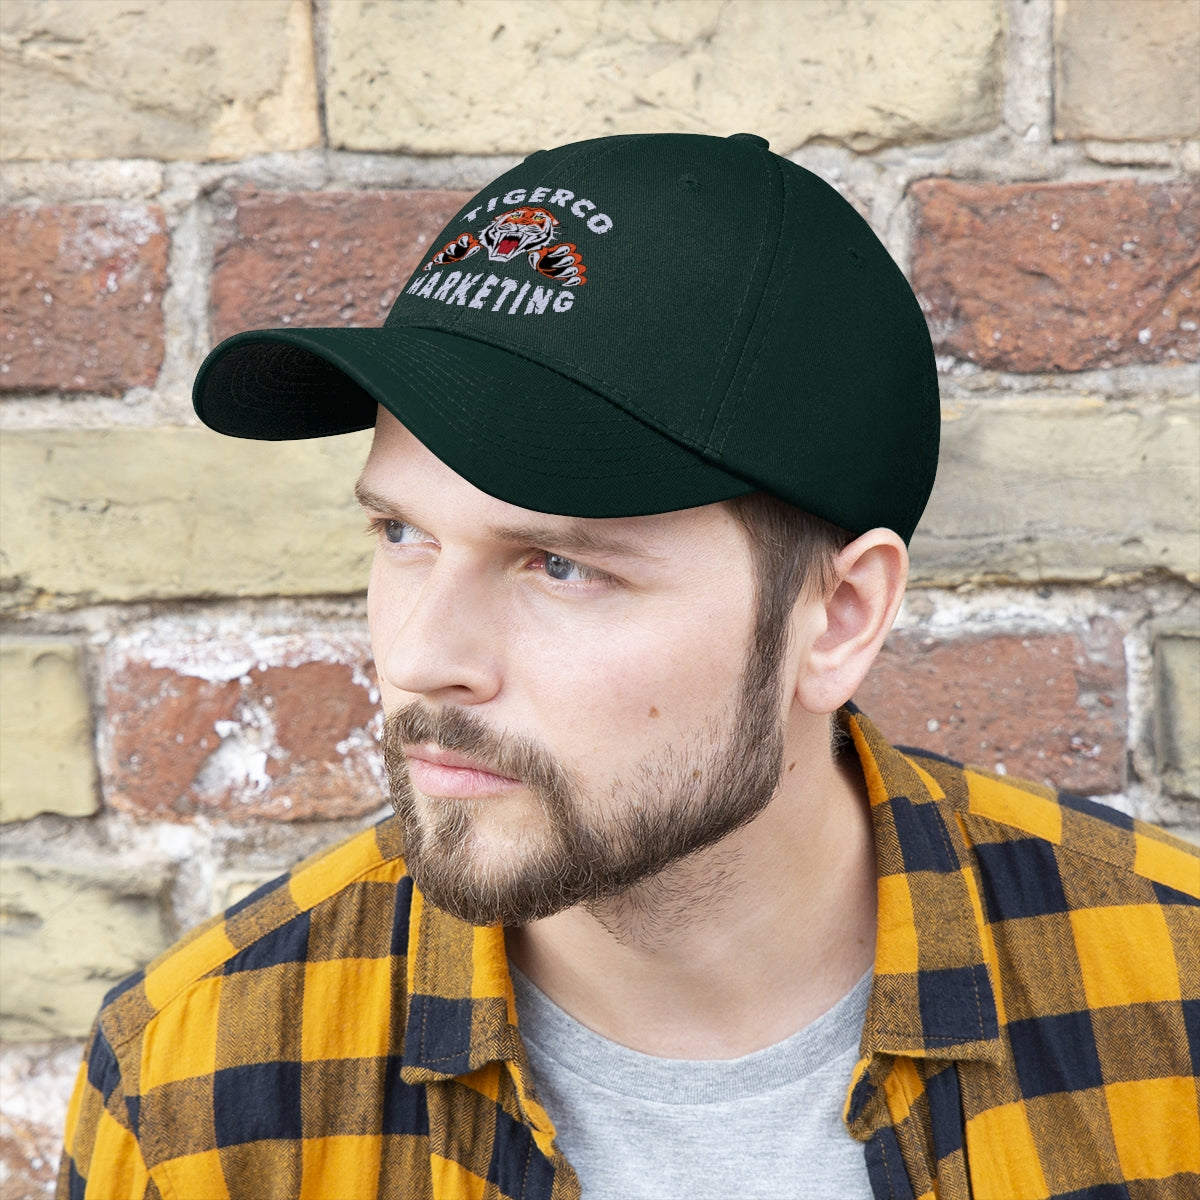 TigerCo Marketing Official Unisex Twill Hat